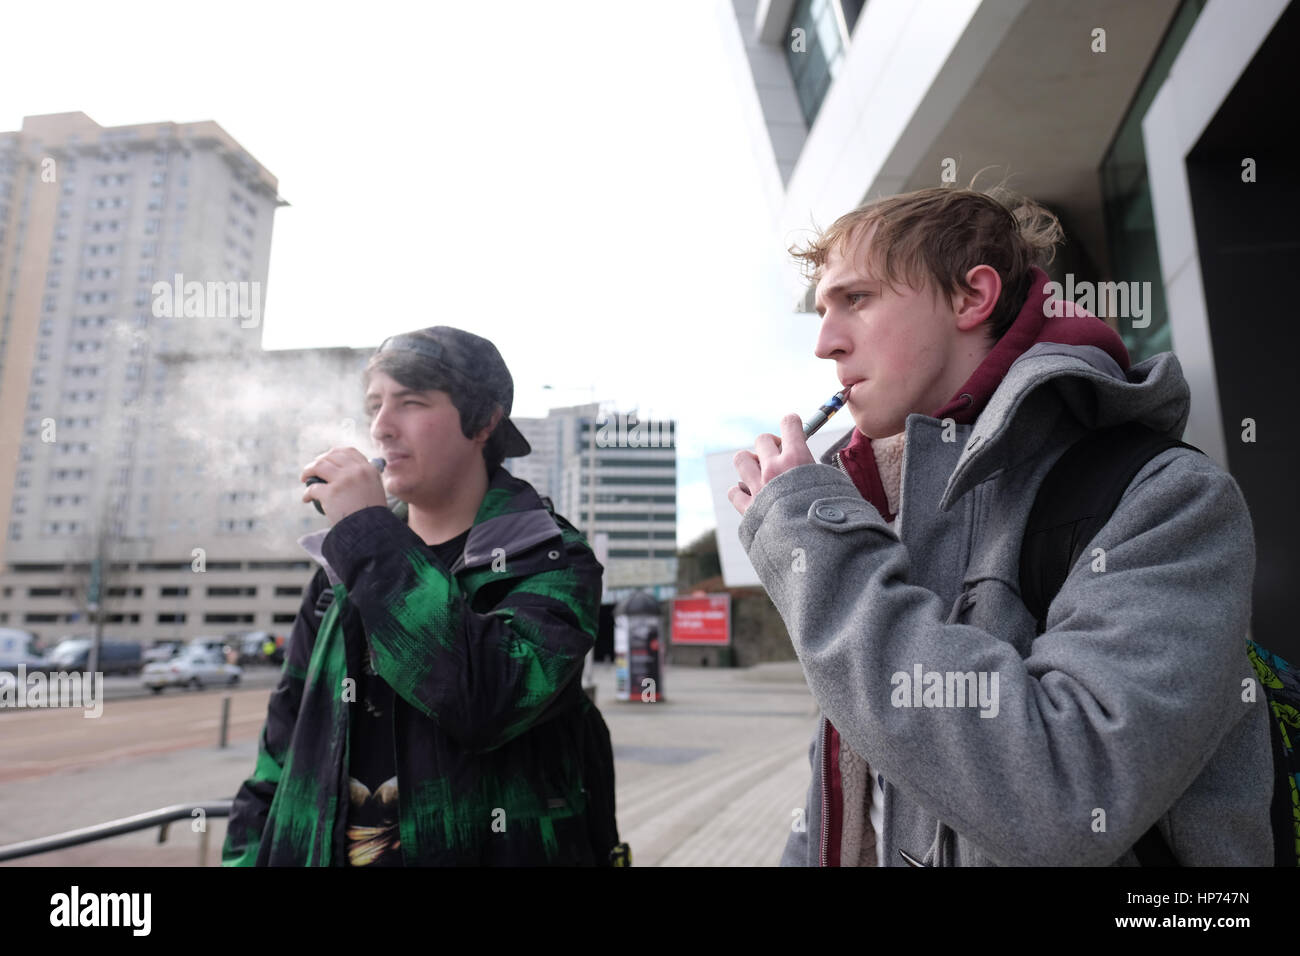 Carrie Edwards (left) 22 of age and Andrew Shaw (right) (22), USW Music Industry students, smoke e-cigarette during a break outside Atrium USW Stock Photo